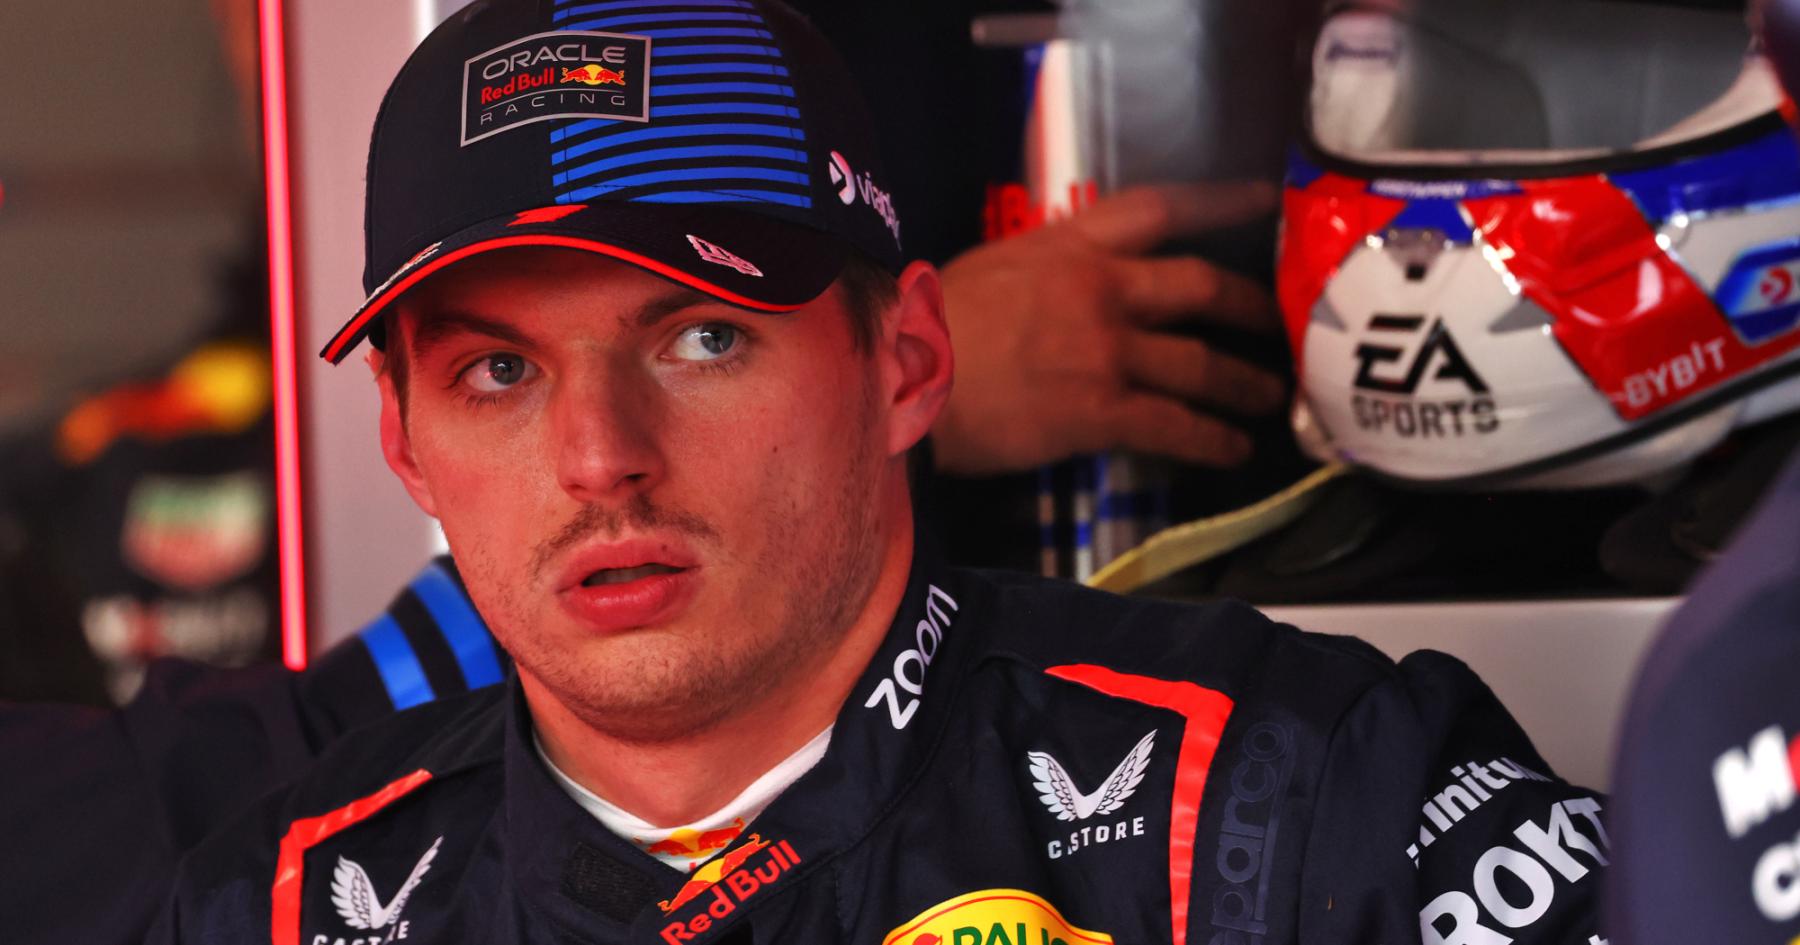 The Future of F1 Villeneuve's Bold Predictions for Verstappen and